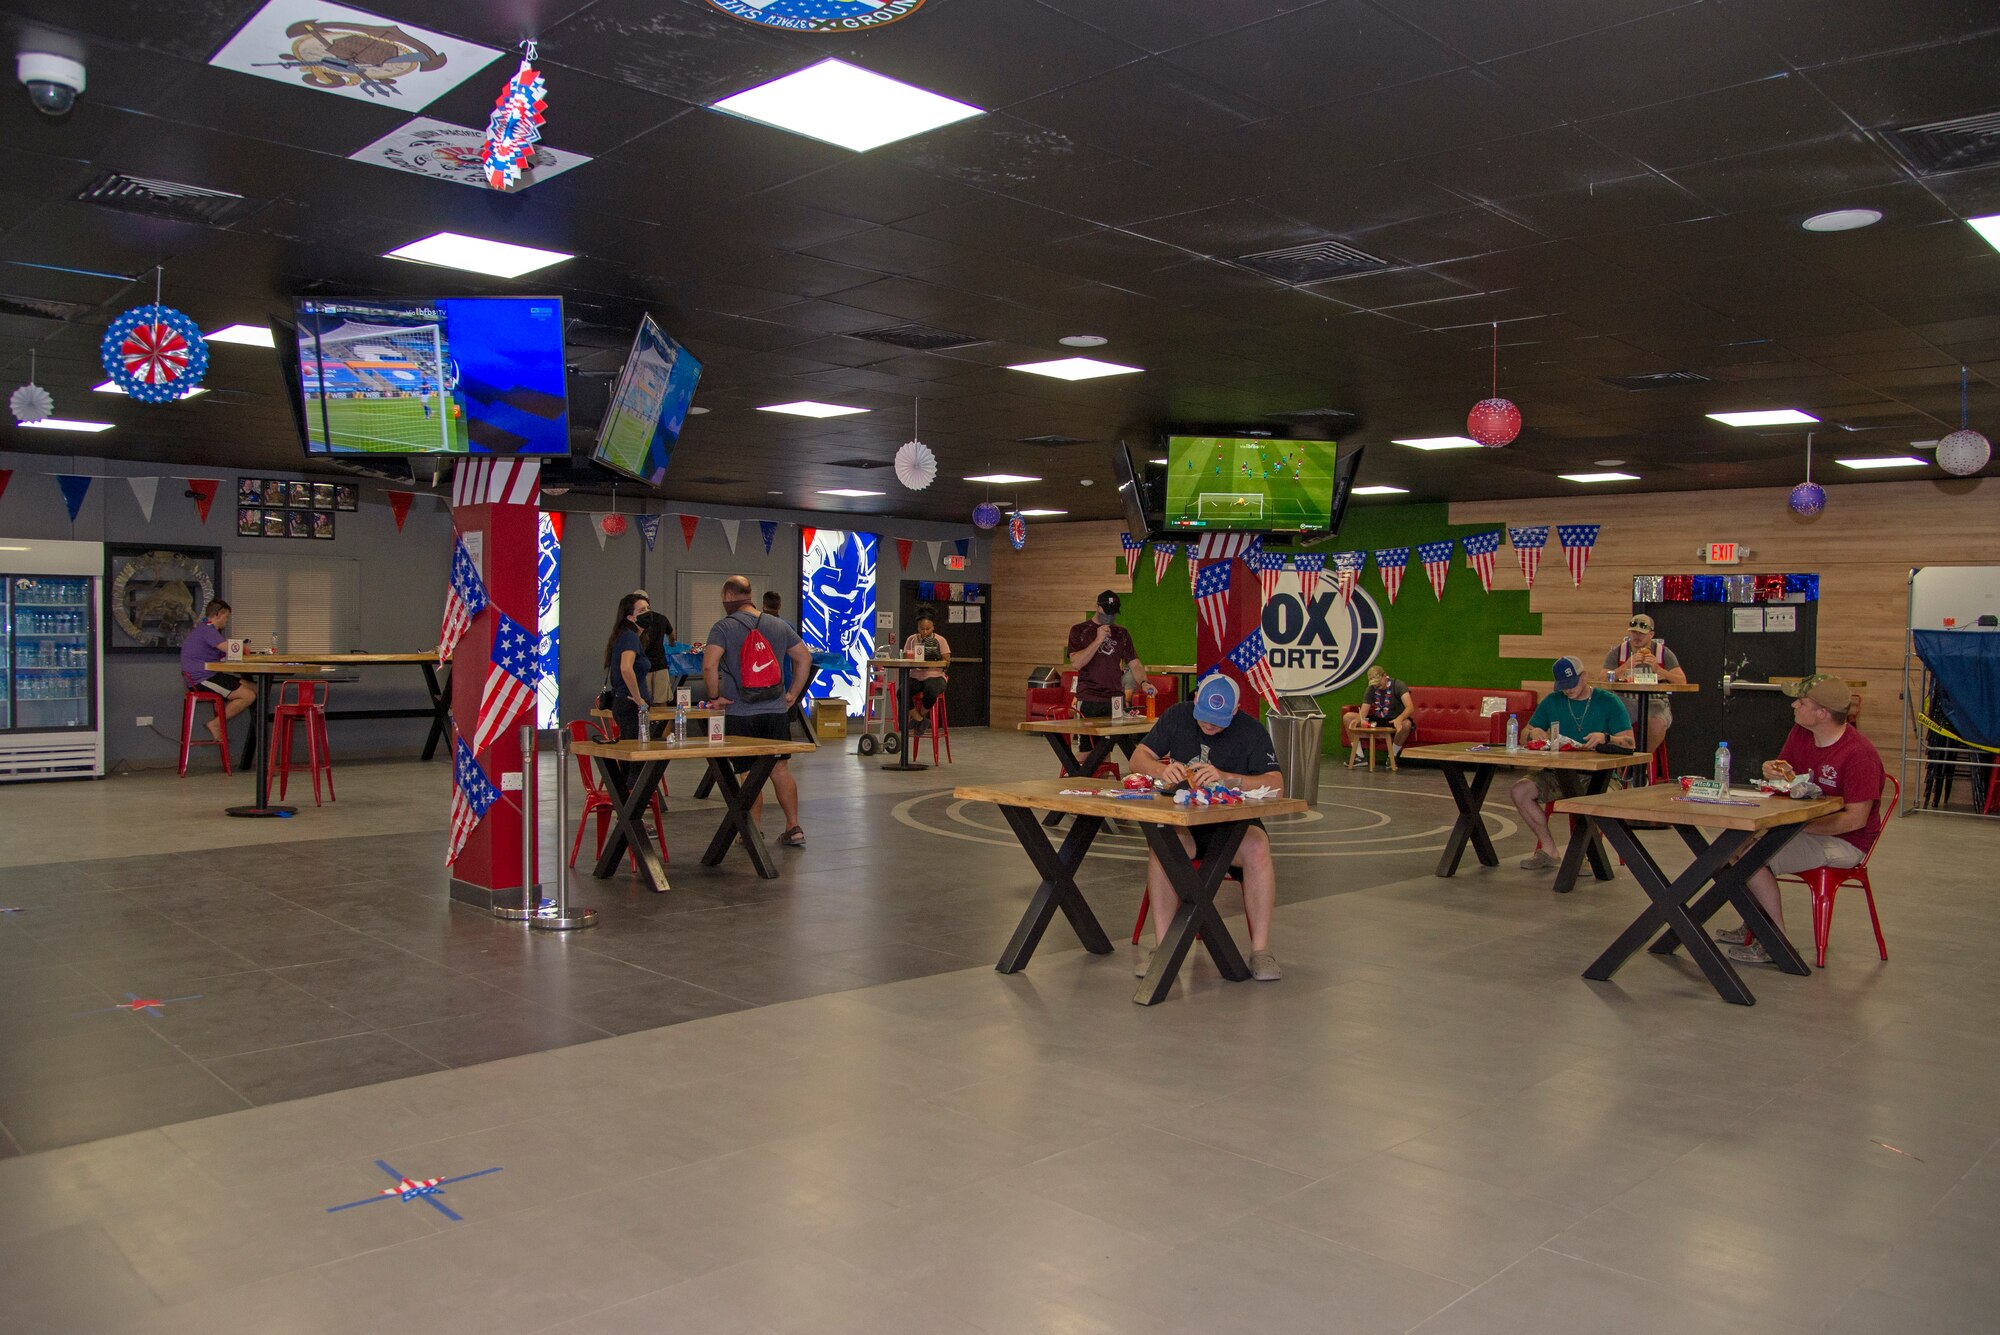 Service members participate in a donated meal event at the Fox Sports Bar, July 4, 2020, Al Udeid Air Base, Qatar. Arby’s, Subway and Pizza hut were some of the establishments that offered free meals to service members to help celebrate the Independence Day holiday.